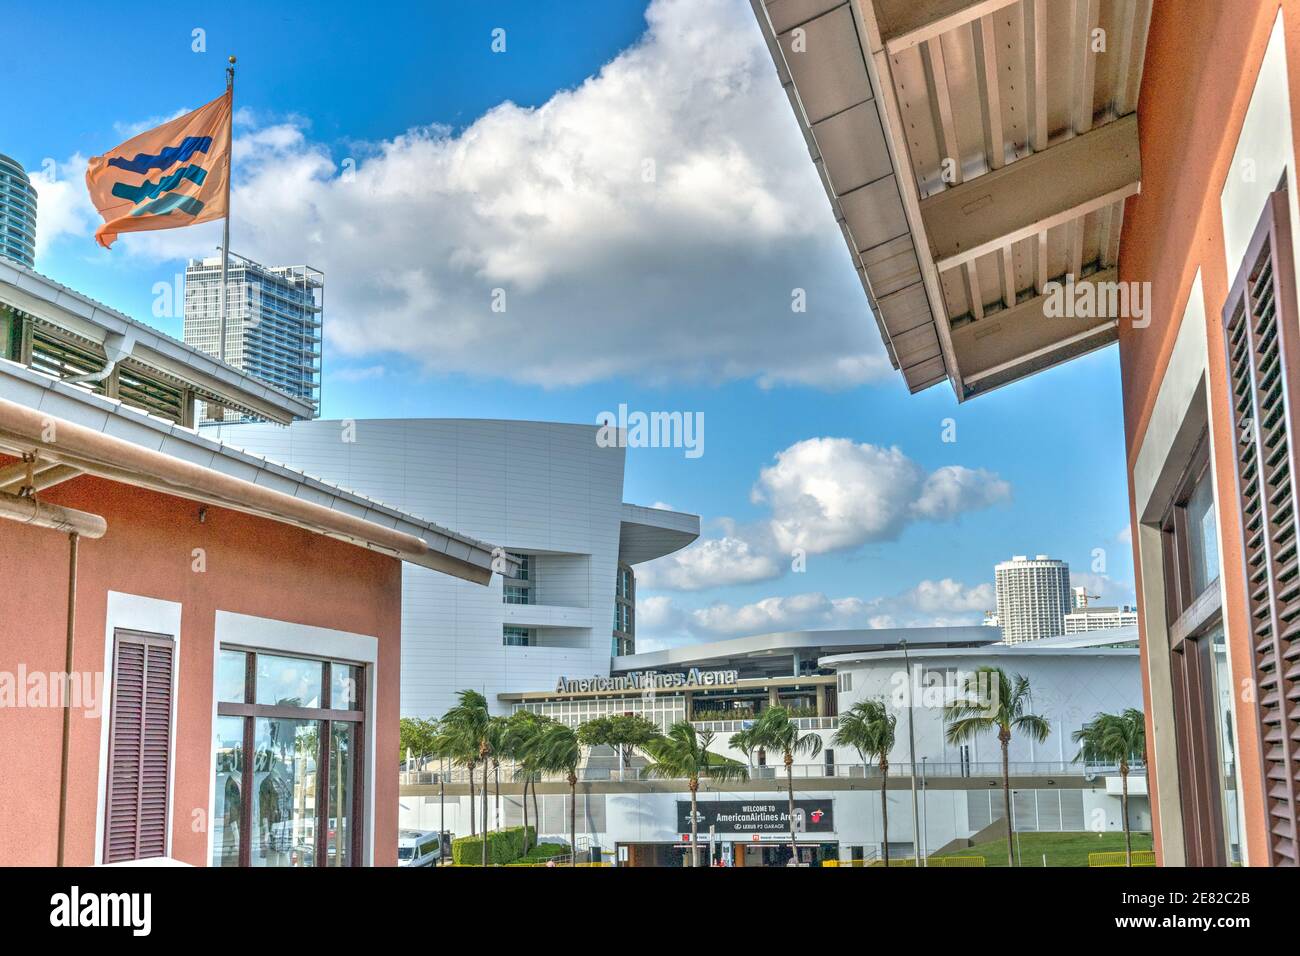 The American Airlines Arena seen from the Bayfront Marketplace Marina located on Biscayne Bay in Miami, Florida. Stock Photo